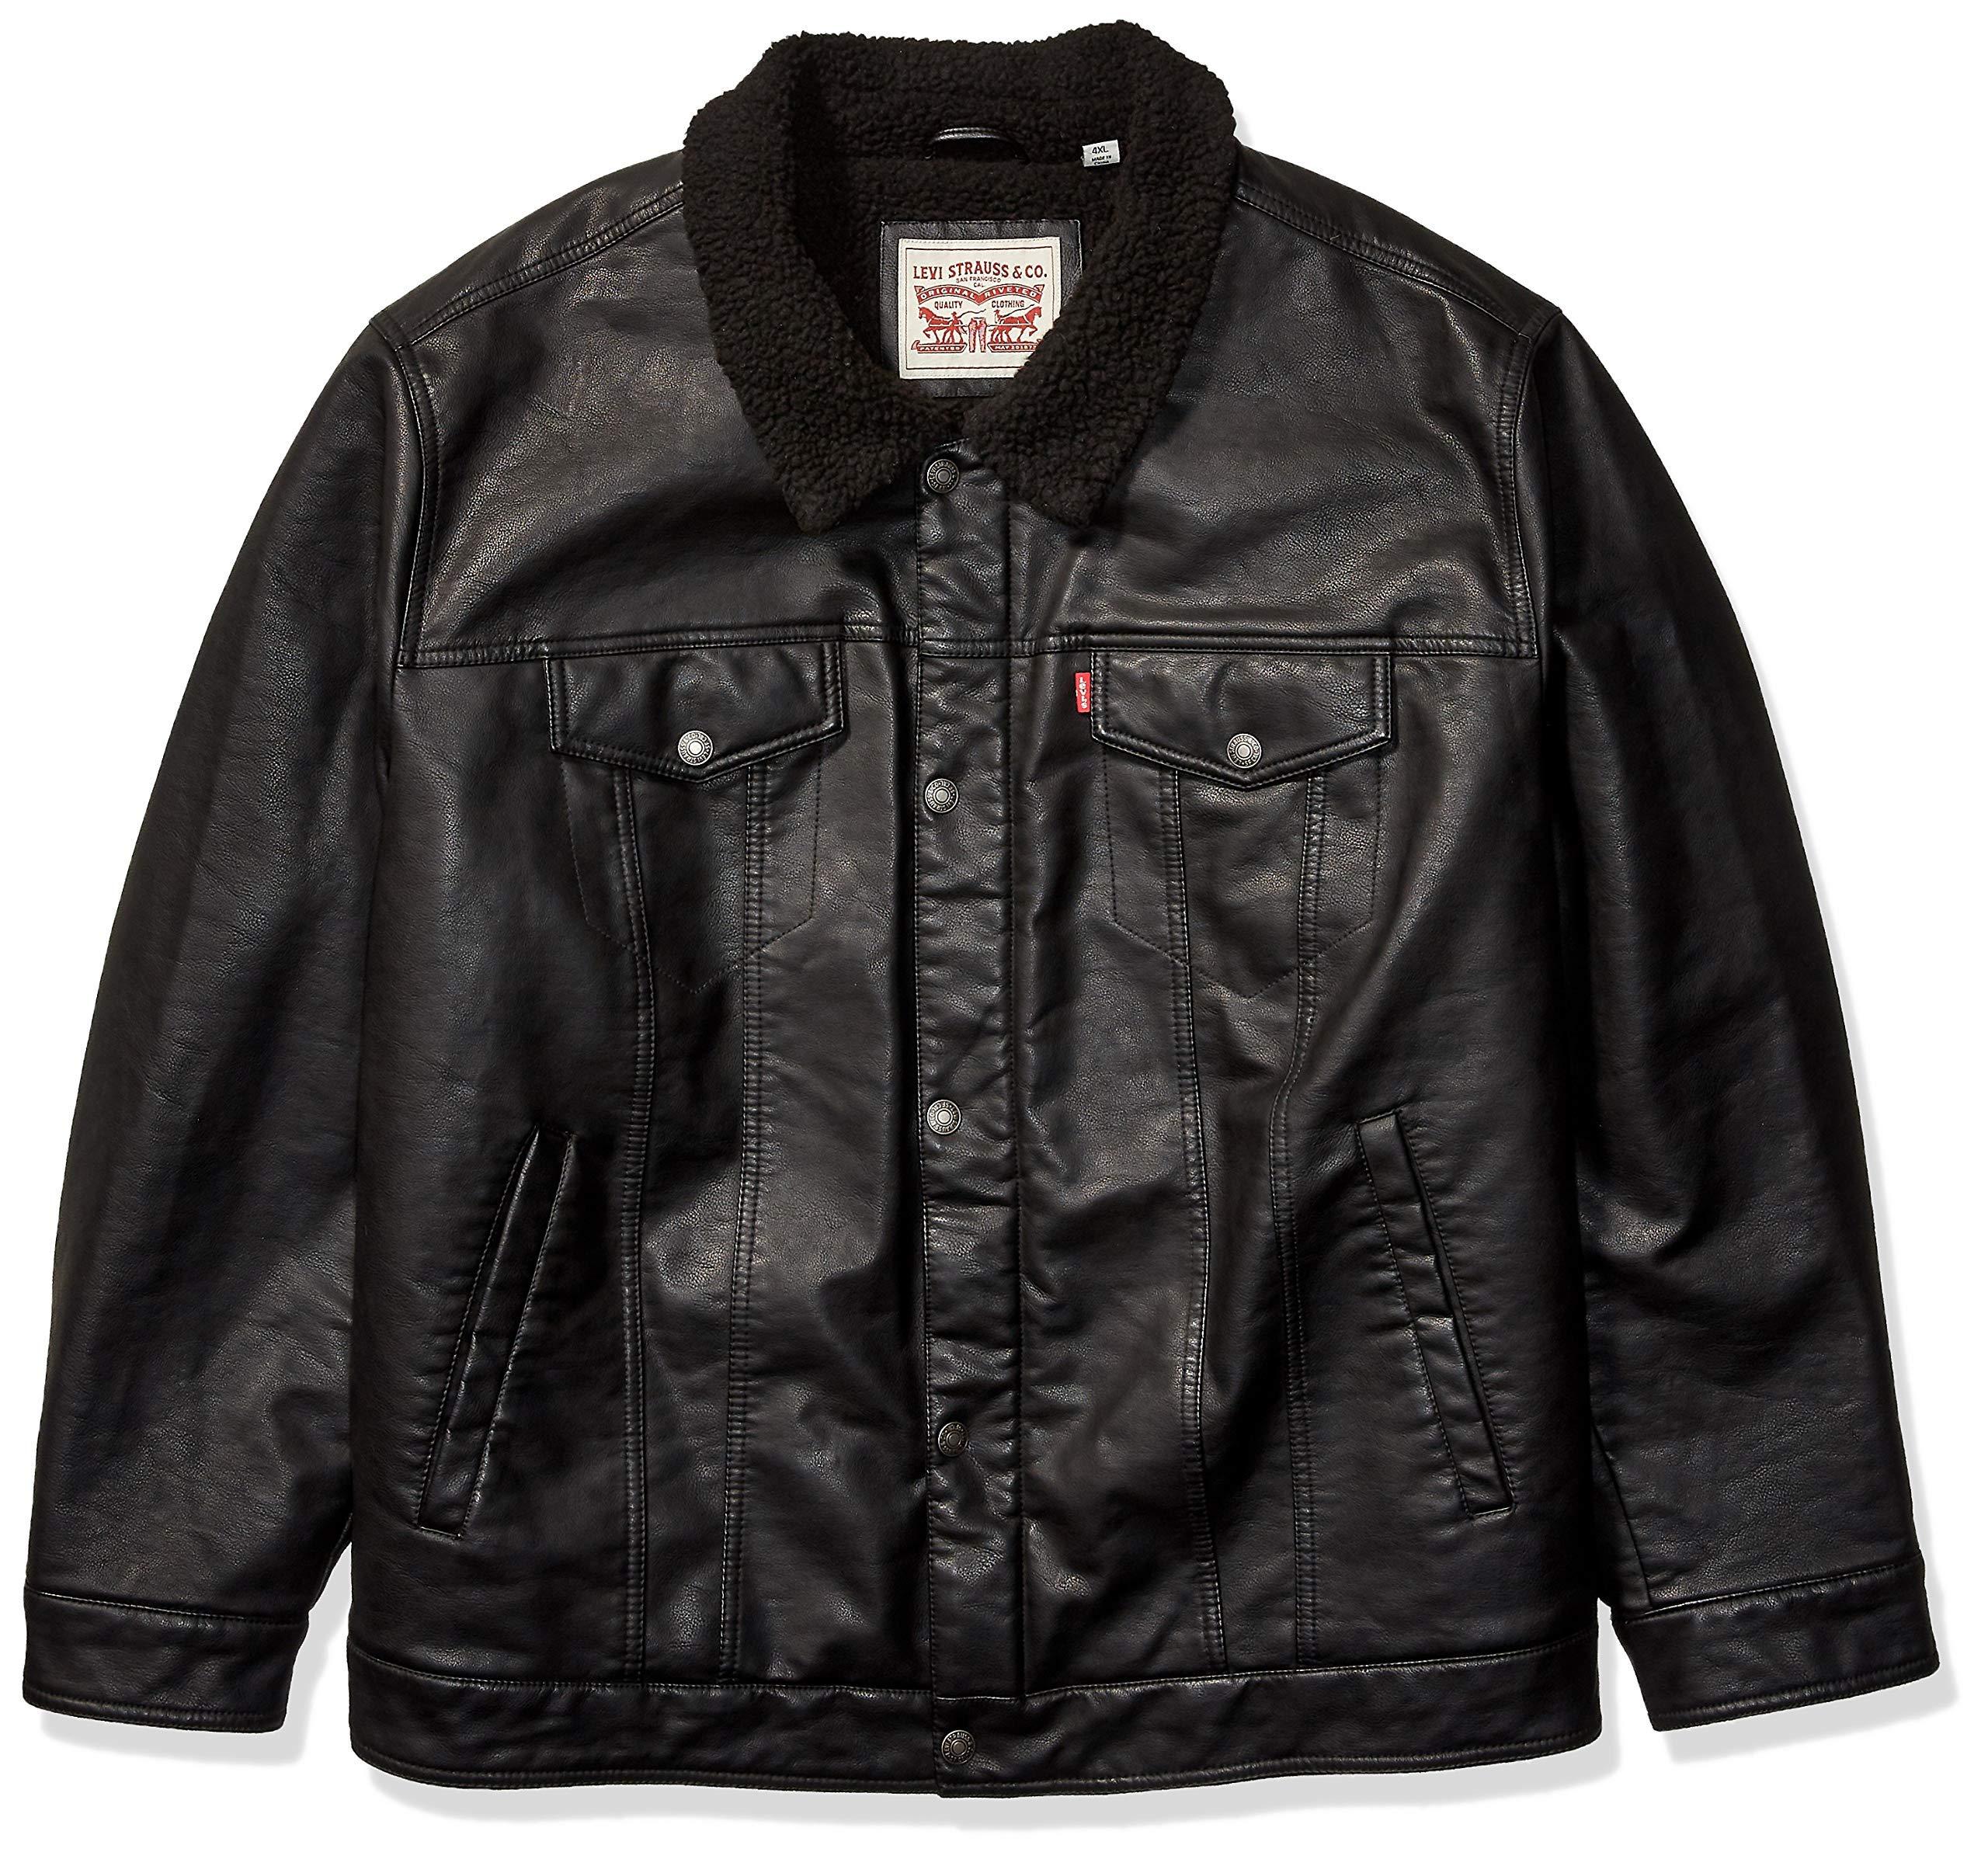 Levi's Faux Leather Sherpa Lined Trucker Jacket in Black for Men - Save